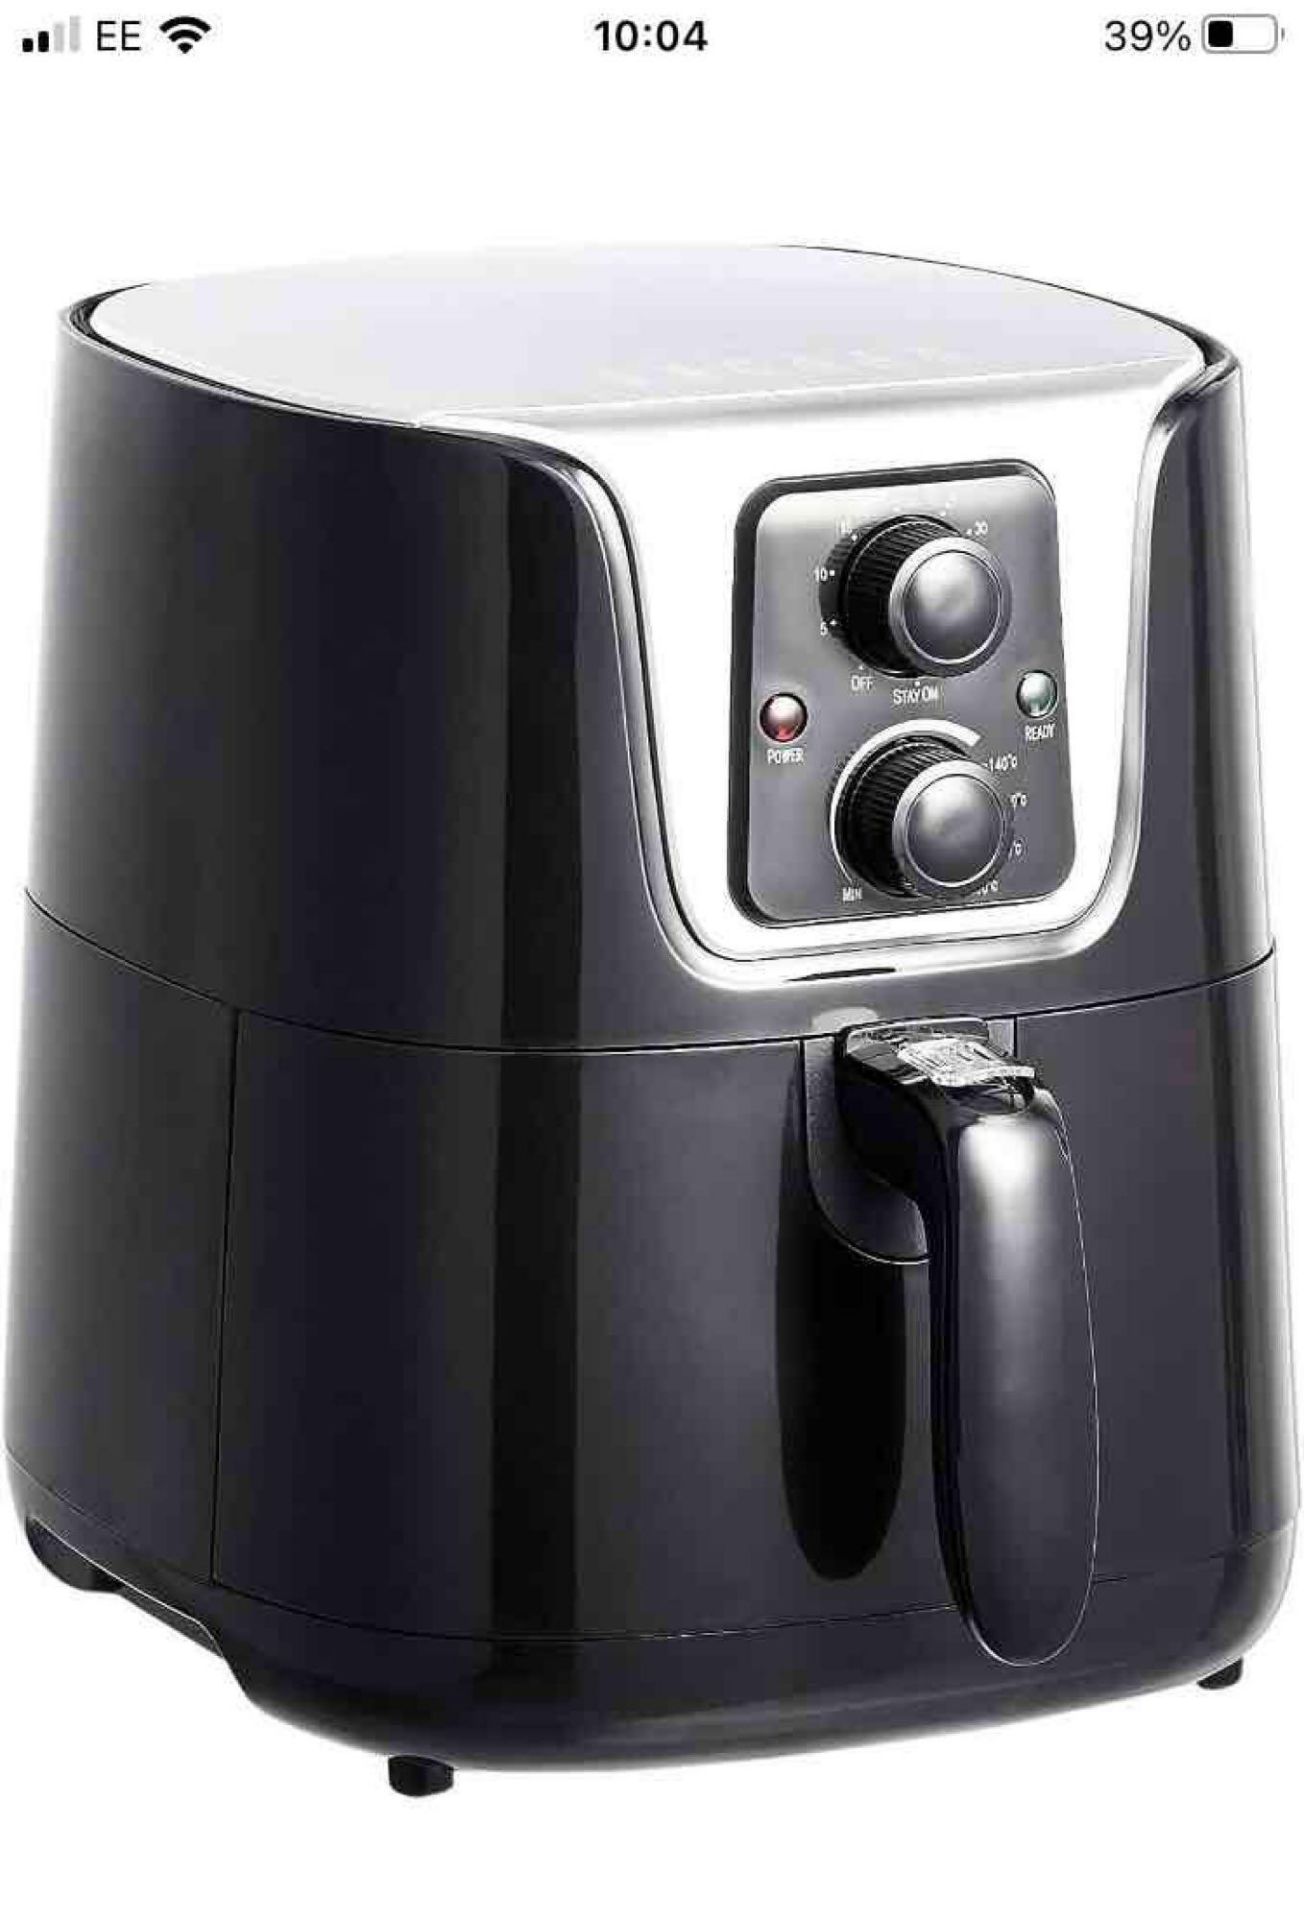 New Sealed boxed Amazon air fryer RRP £34.99